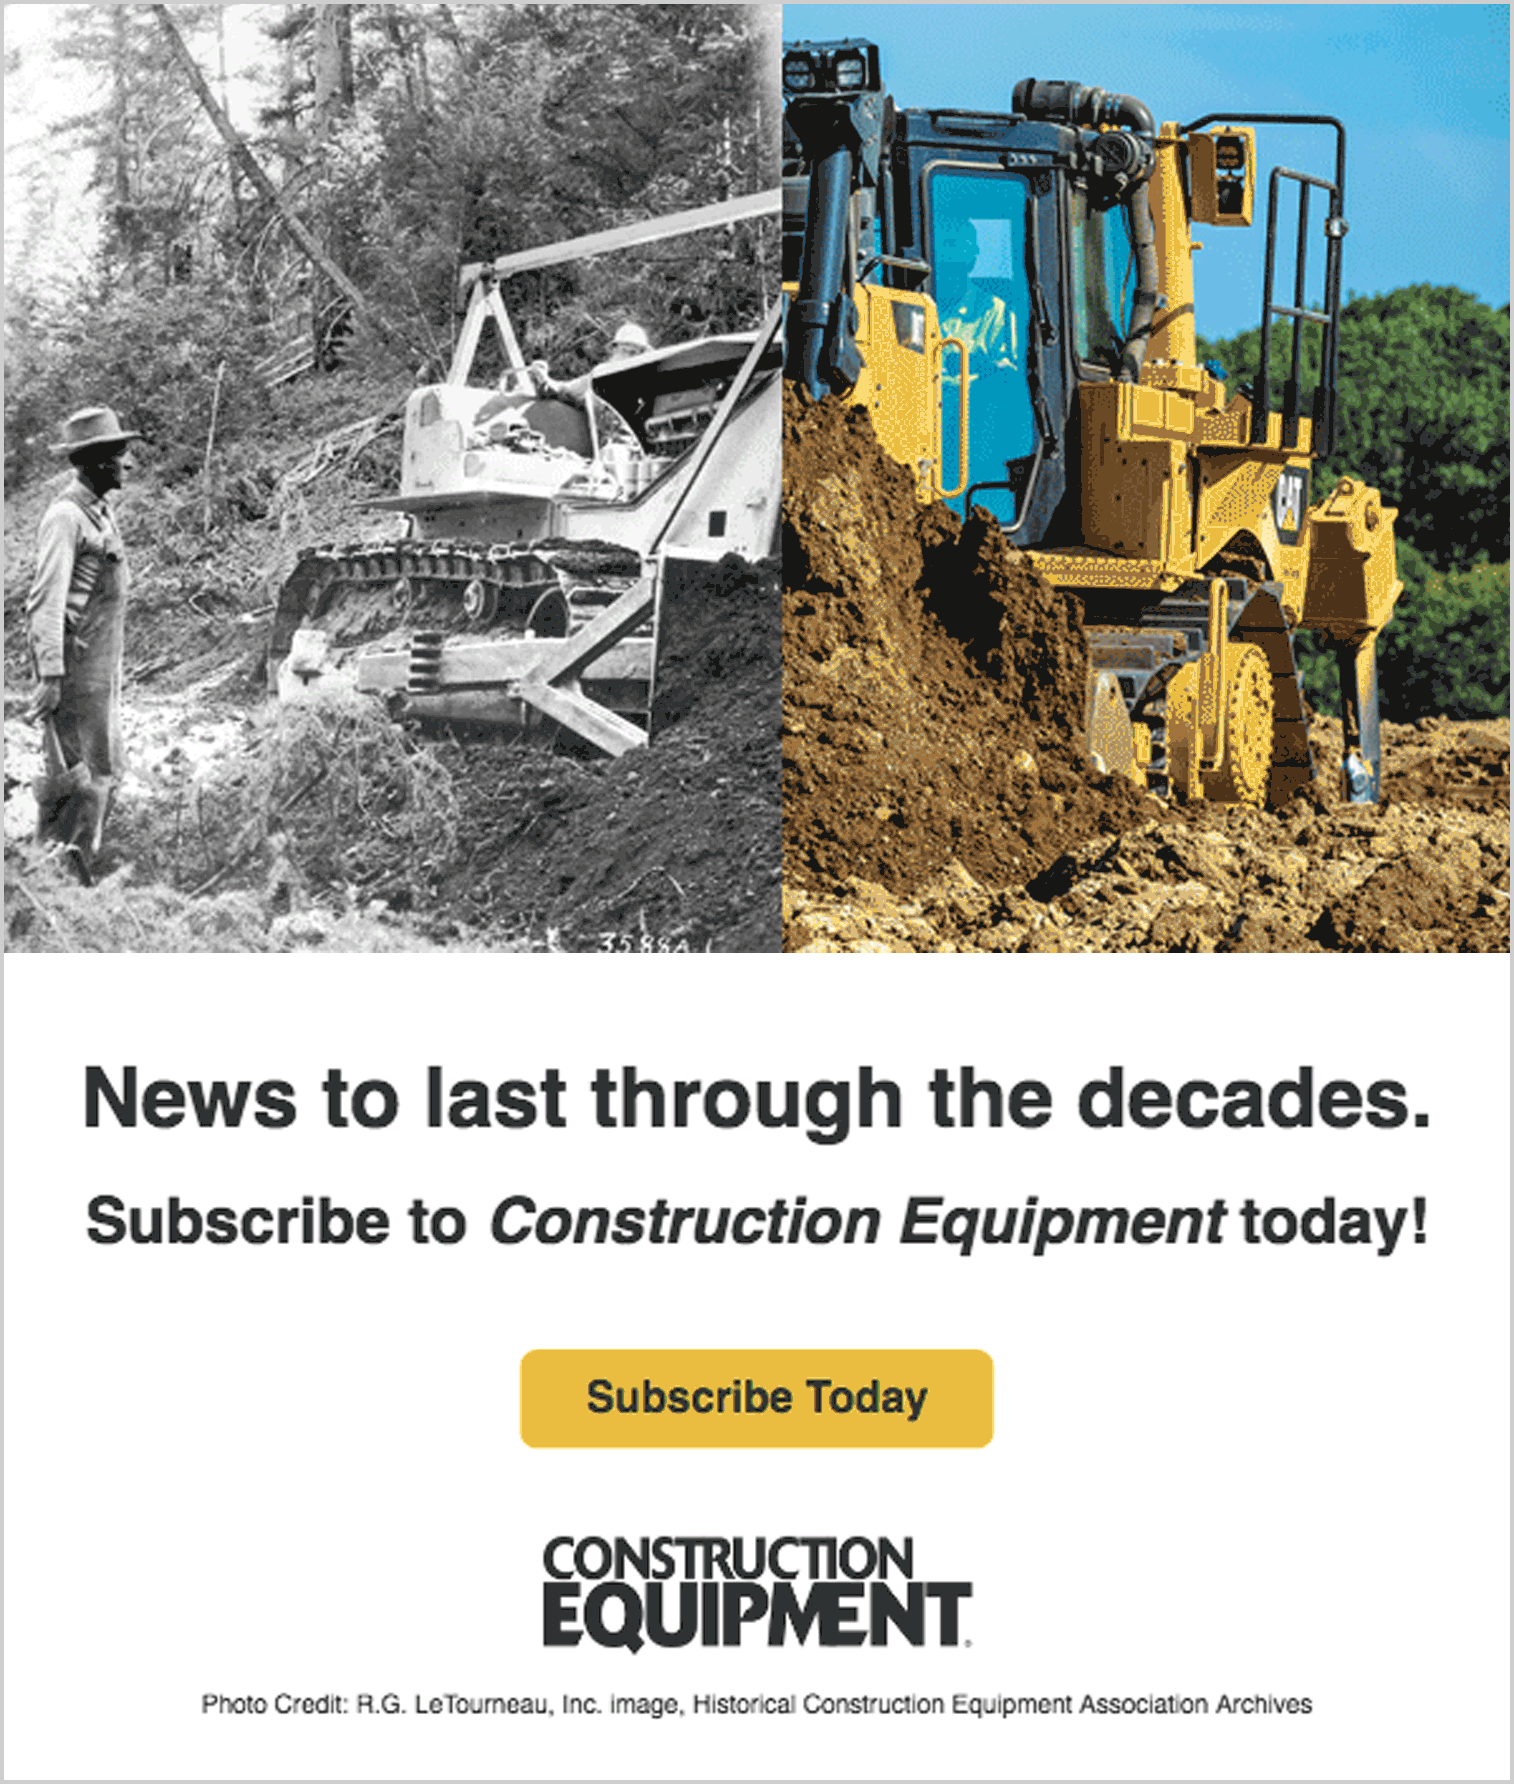 Construction Equipment Subscription Email